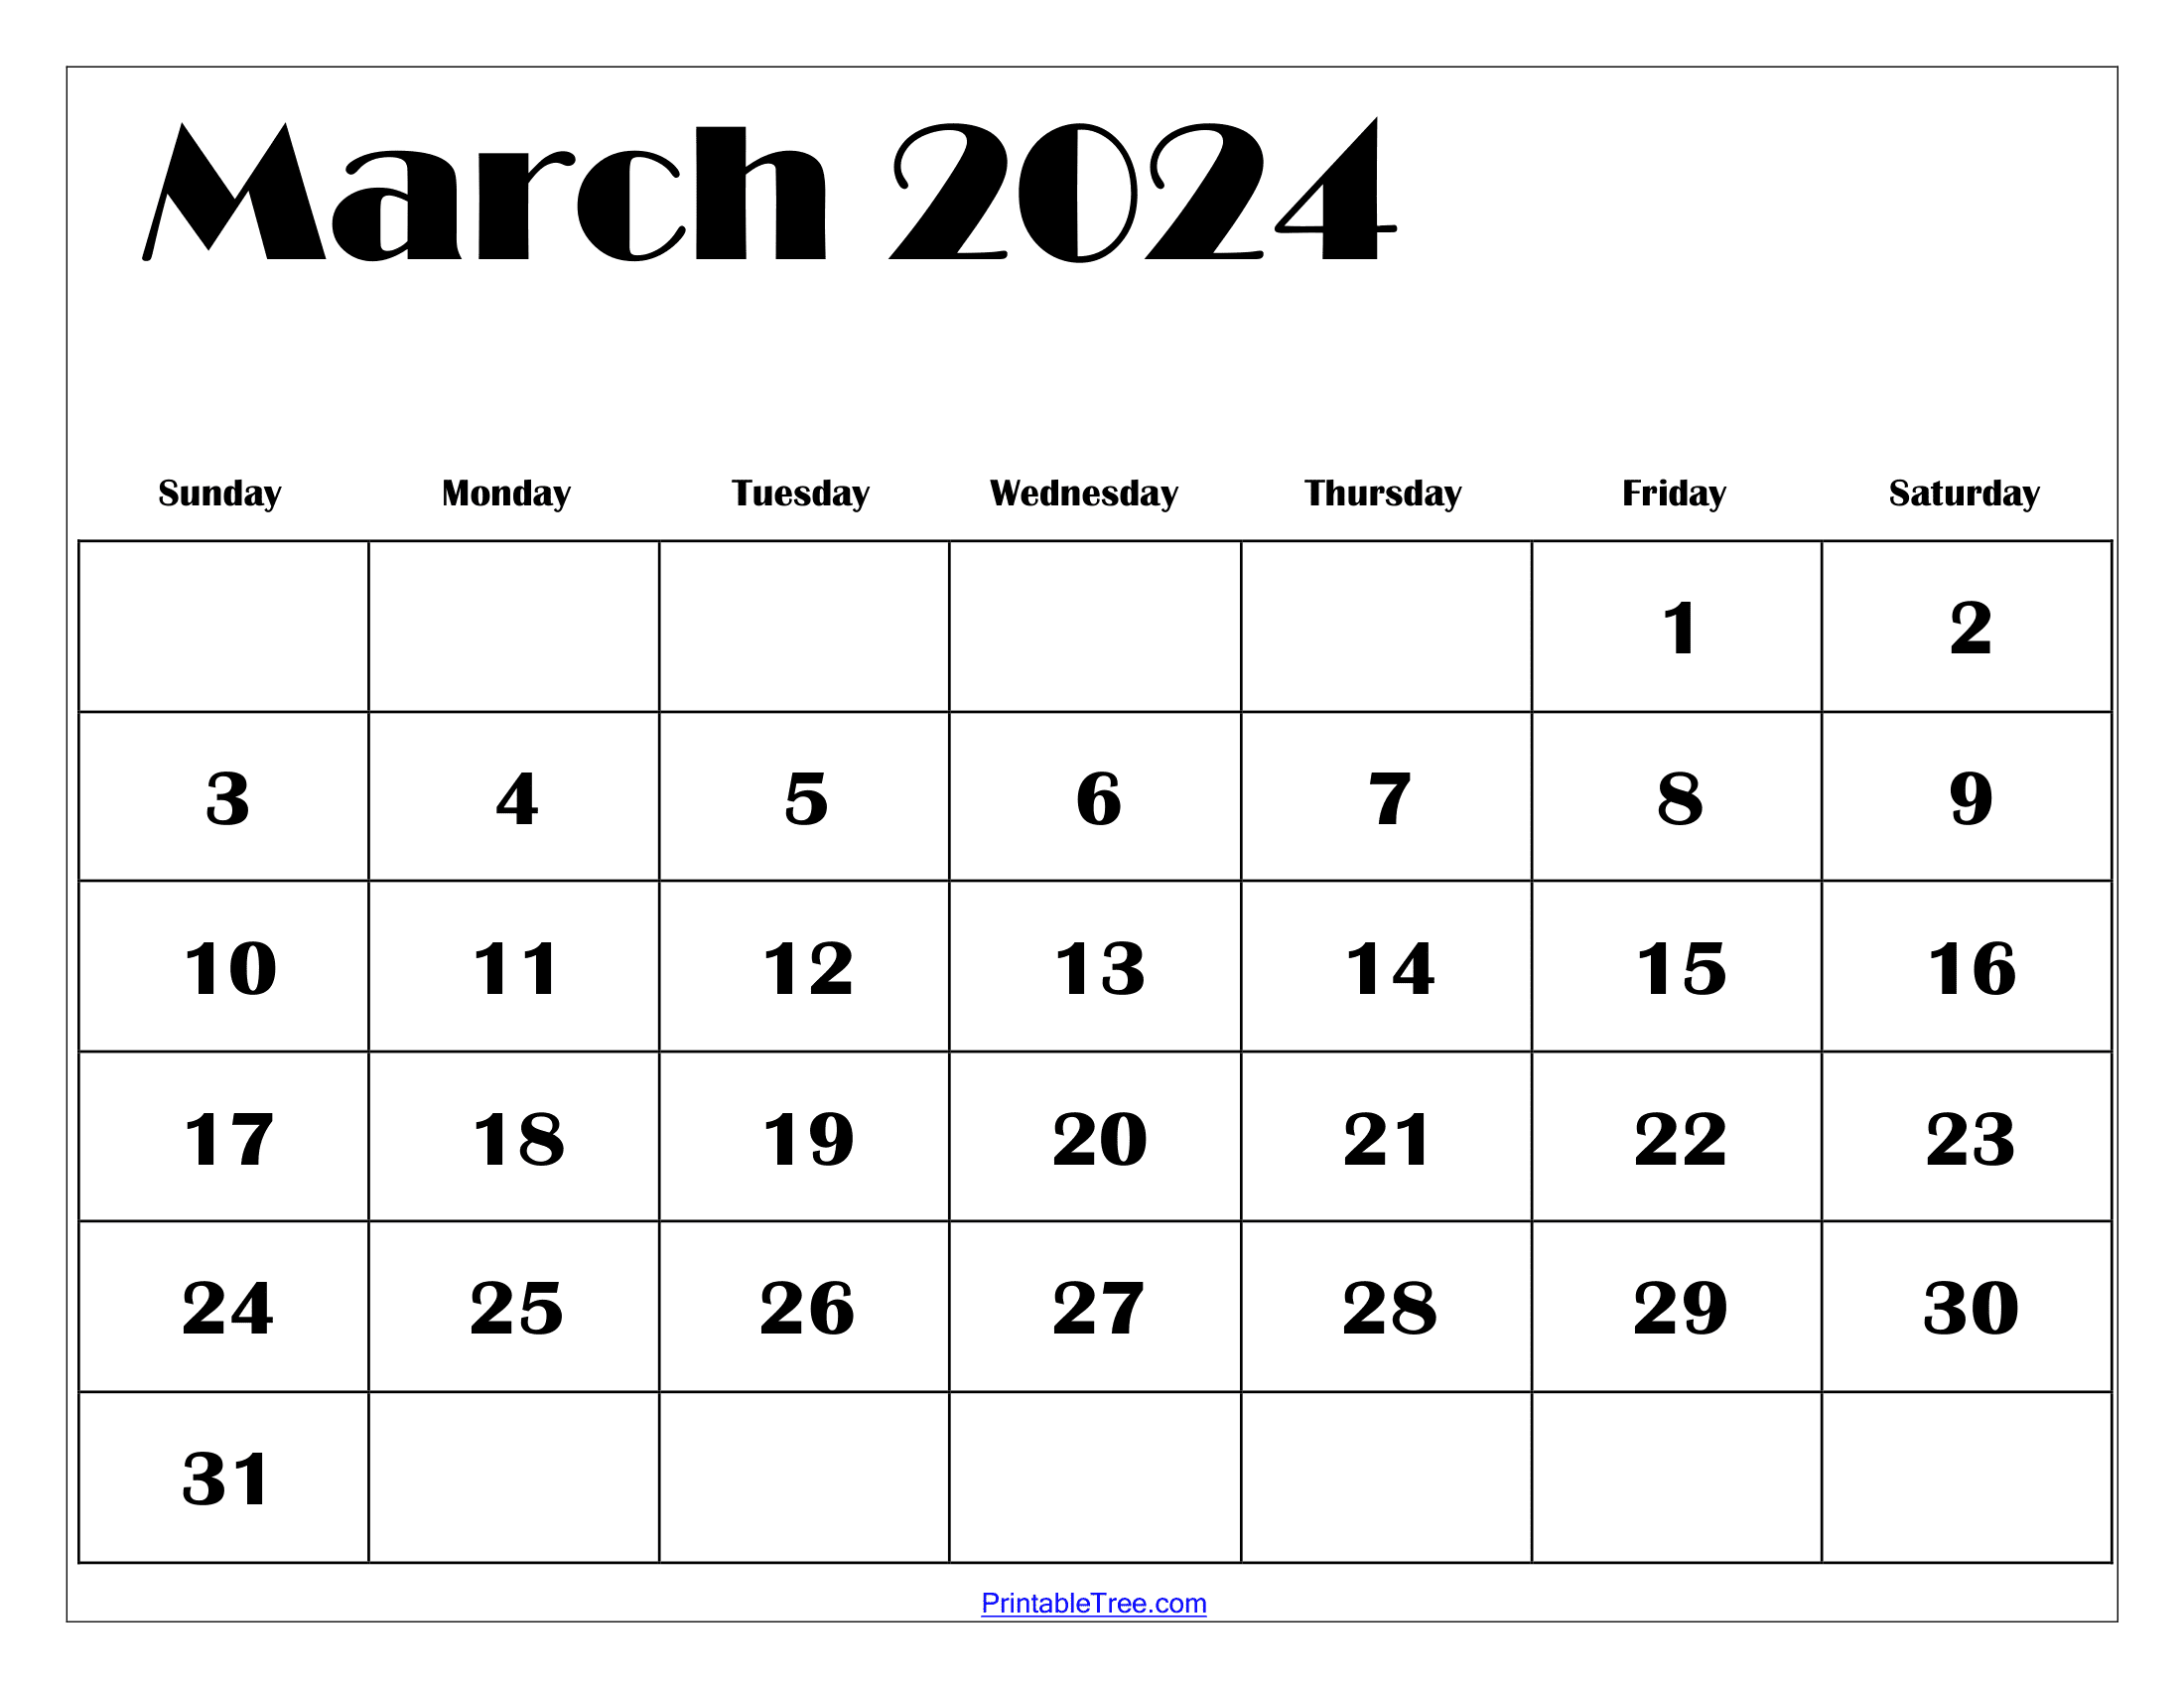 March 2024 Calendar Printable Pdf With Holidays Template Free for Free Calendar Printable March 2024